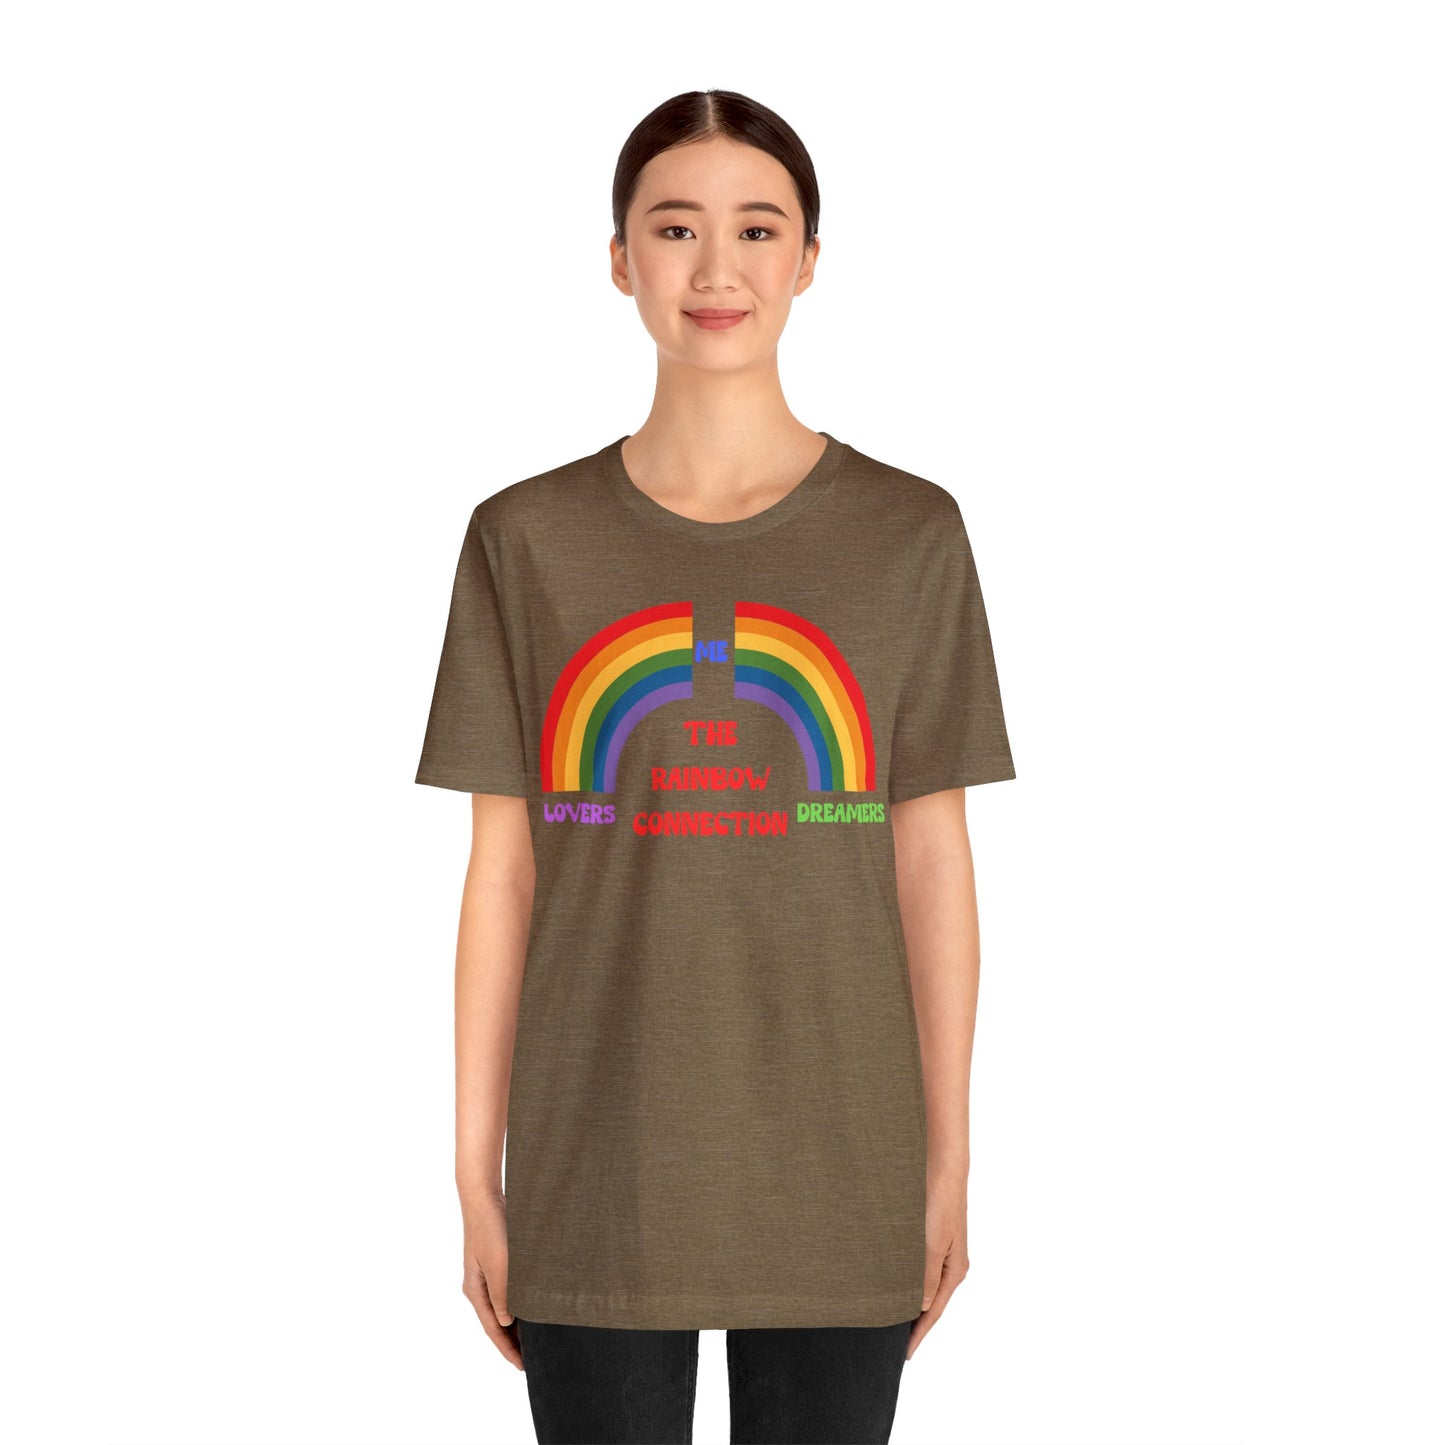 Rainbow Connection | Carpenters | Muppets | Pride | Statement Tee | Lovers Dreamers  & Me | Music Lover's Gift | Unisex | Men's | Women's | Tee | T-Shirt